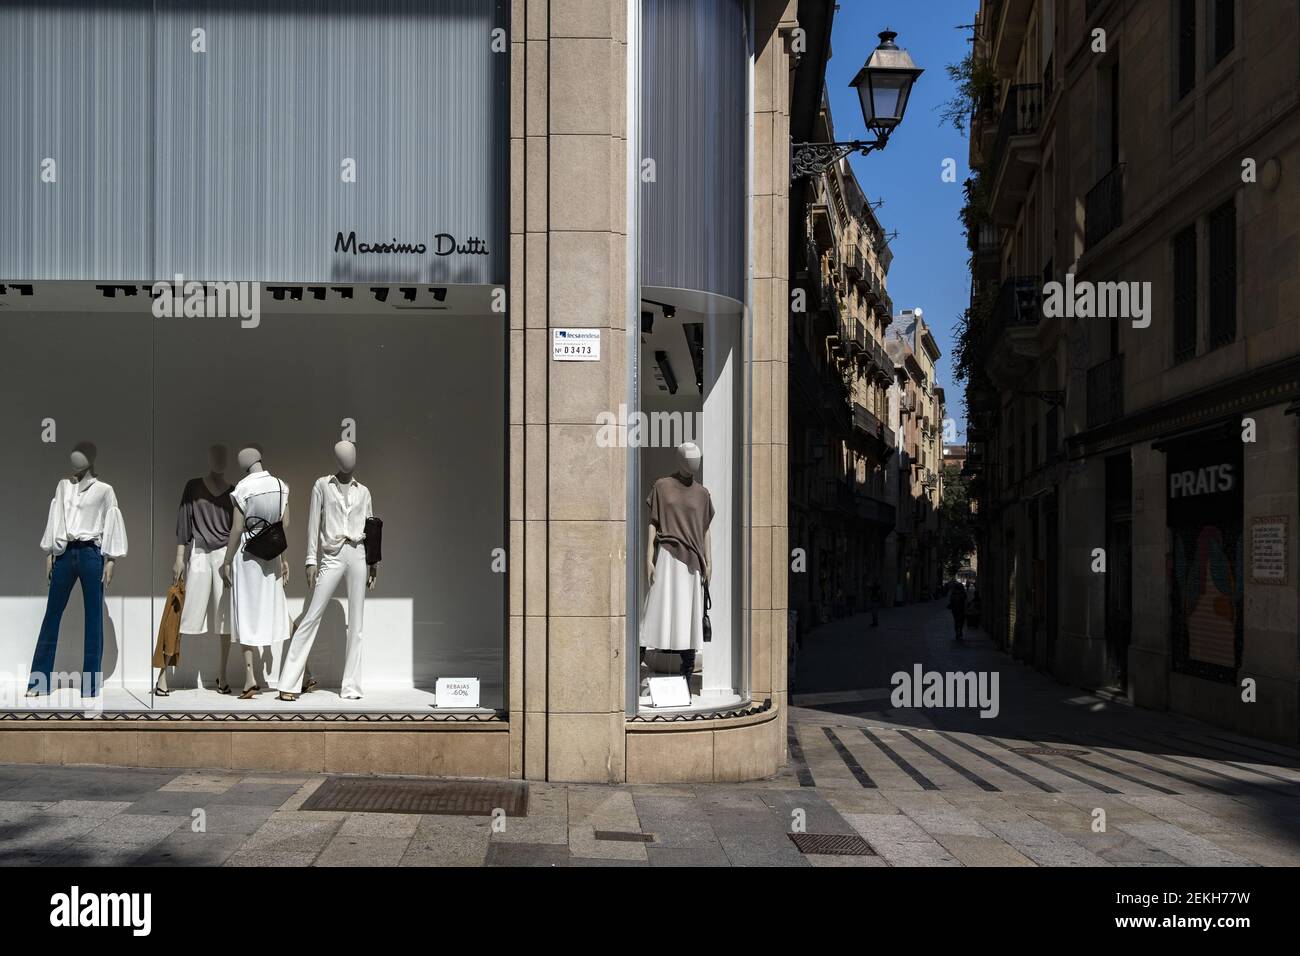 One of the Massimo Dutti stores, a brand of the Inditex group, is pictured  at the commercial hub of Portal del l'Àngel de Barcelona. After presenting  economic losses for the first time